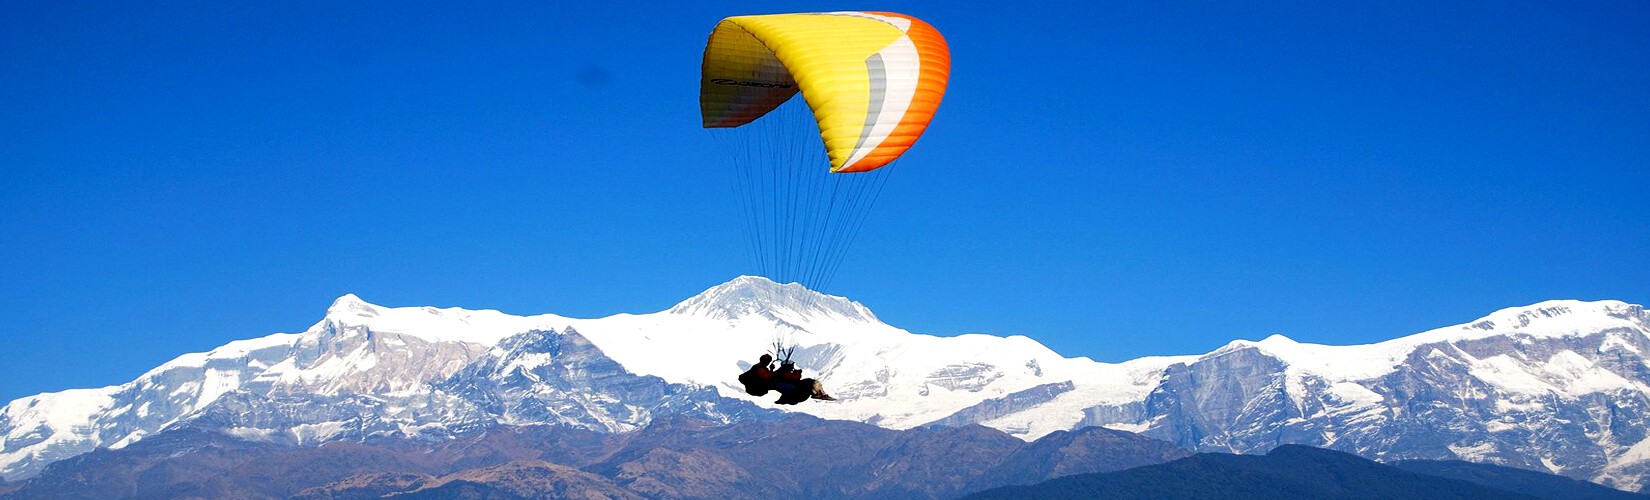 Nepal Holiday Tour | Best Holiday Tour in Nepal | Nepal Holiday Tour Package | Reasonable Treks and Tour